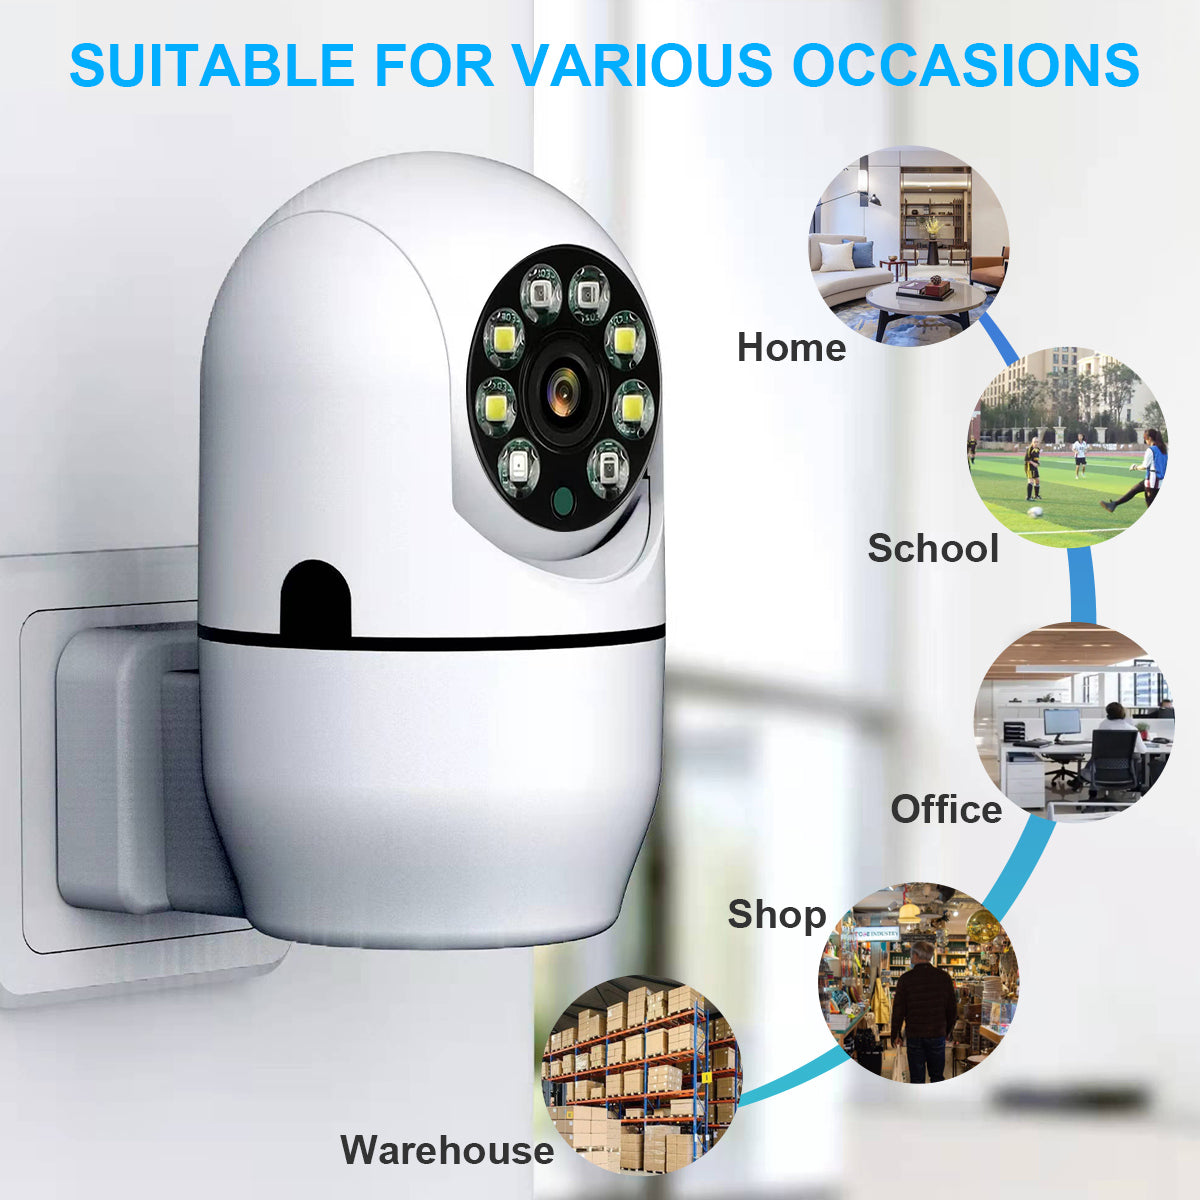 Wireless Security Camera 1080P WiFi Surveillance Home Camera with Motion Detection, 2-Way Audio, Night Vision,SD Card Storage